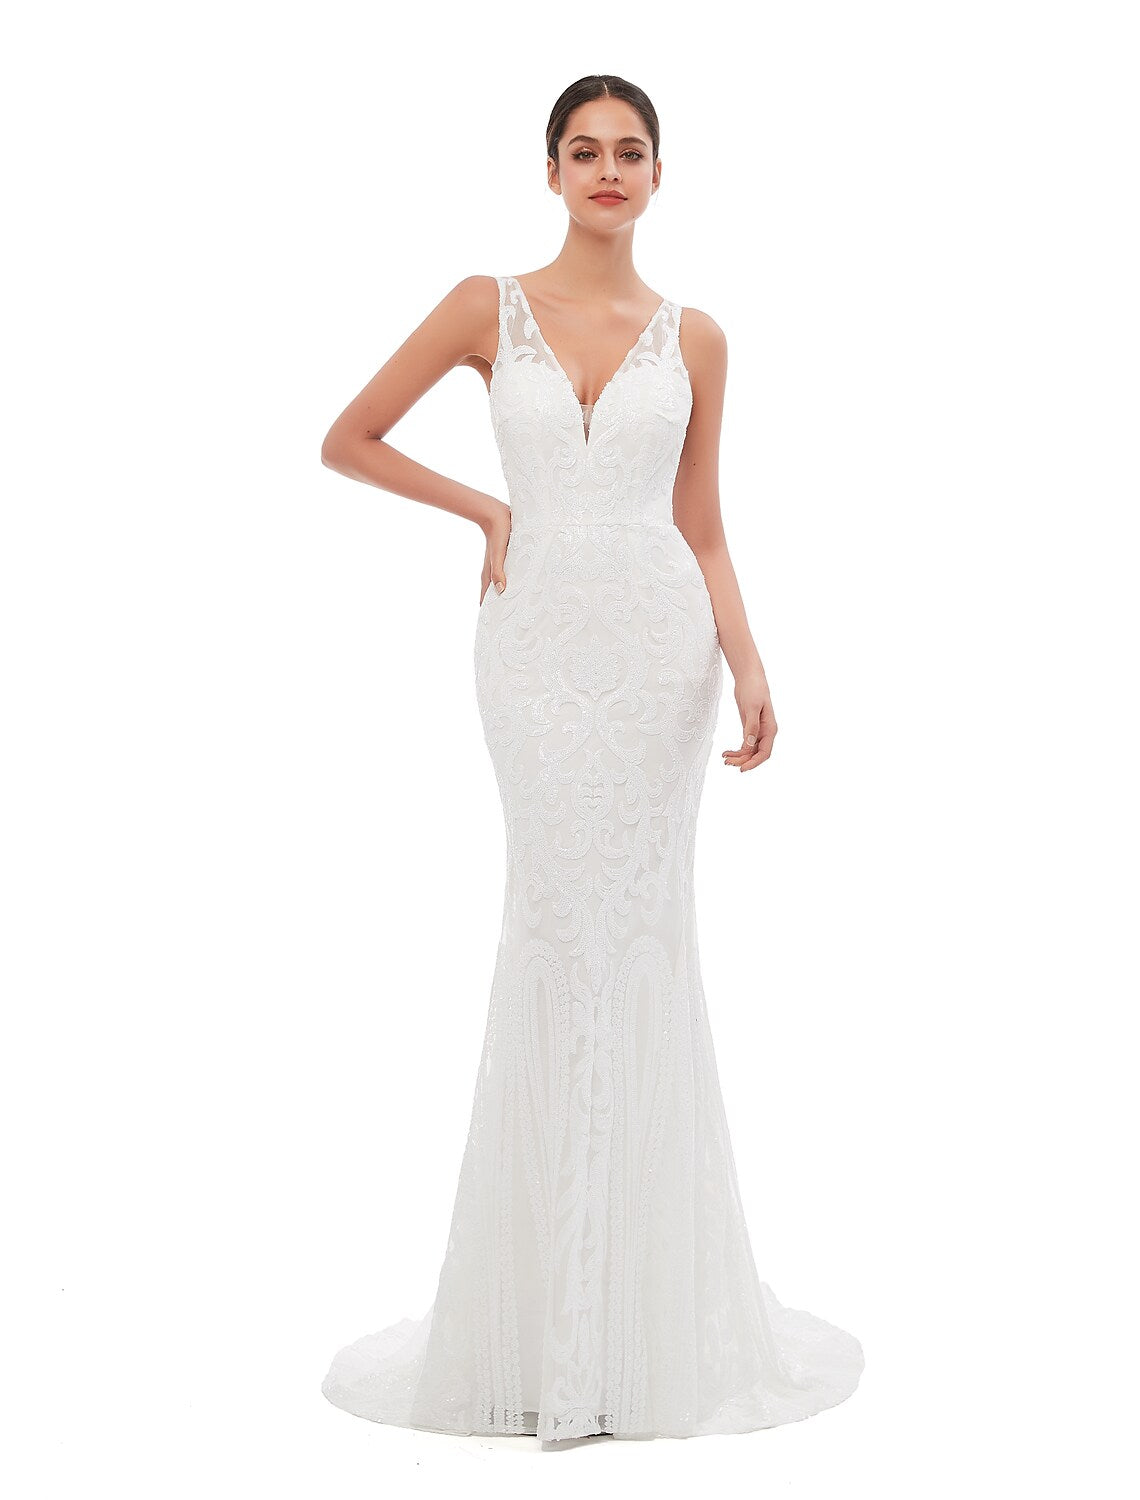 Mermaid / Trumpet Evening Gown Celebrity Style Dress Engagement Court Train Sleeveless V Neck Sequined with Sequin Embroidery